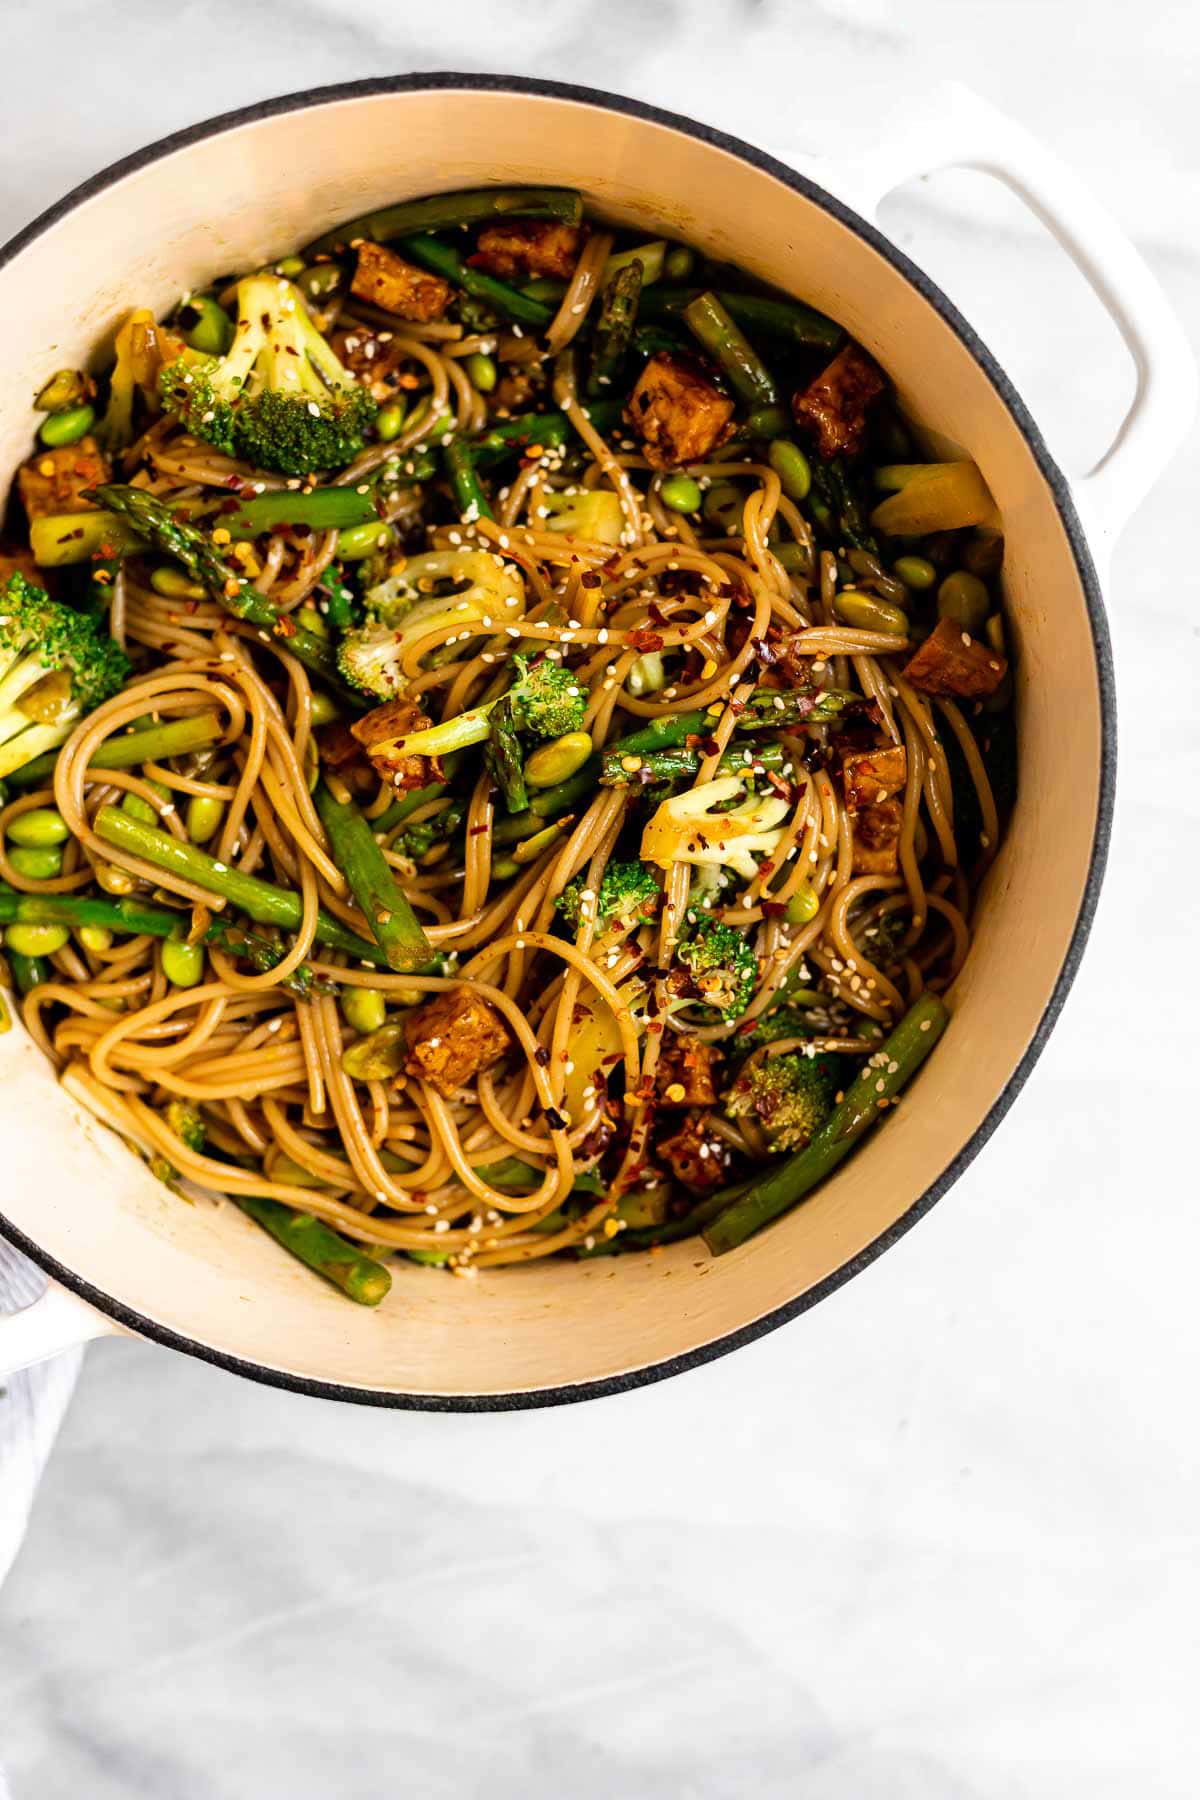 Final recipe in a pot with noodles, broccoli and tofu.